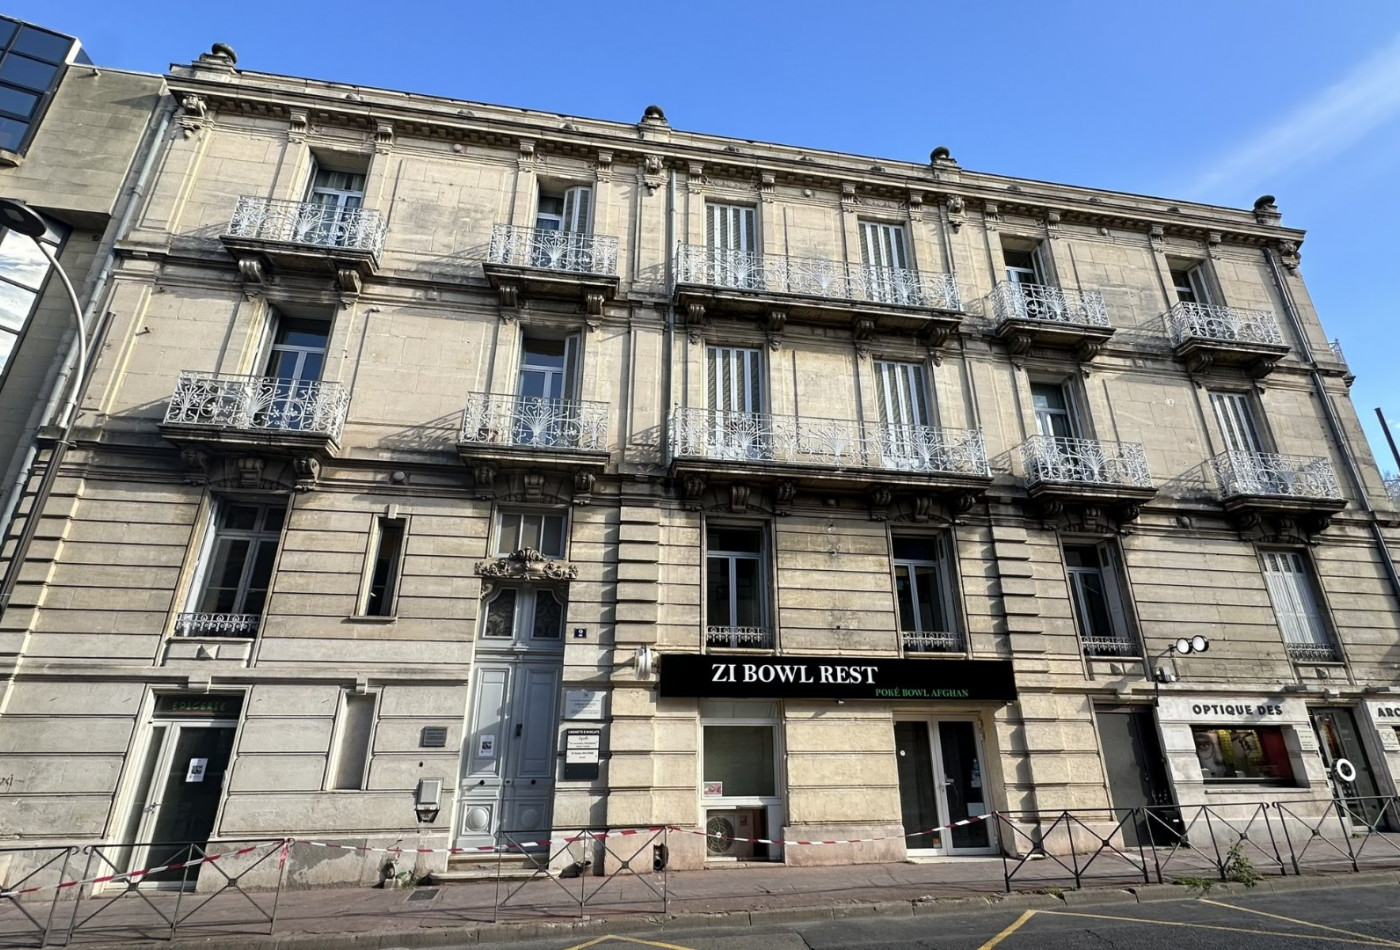 location Local commercial Montpellier